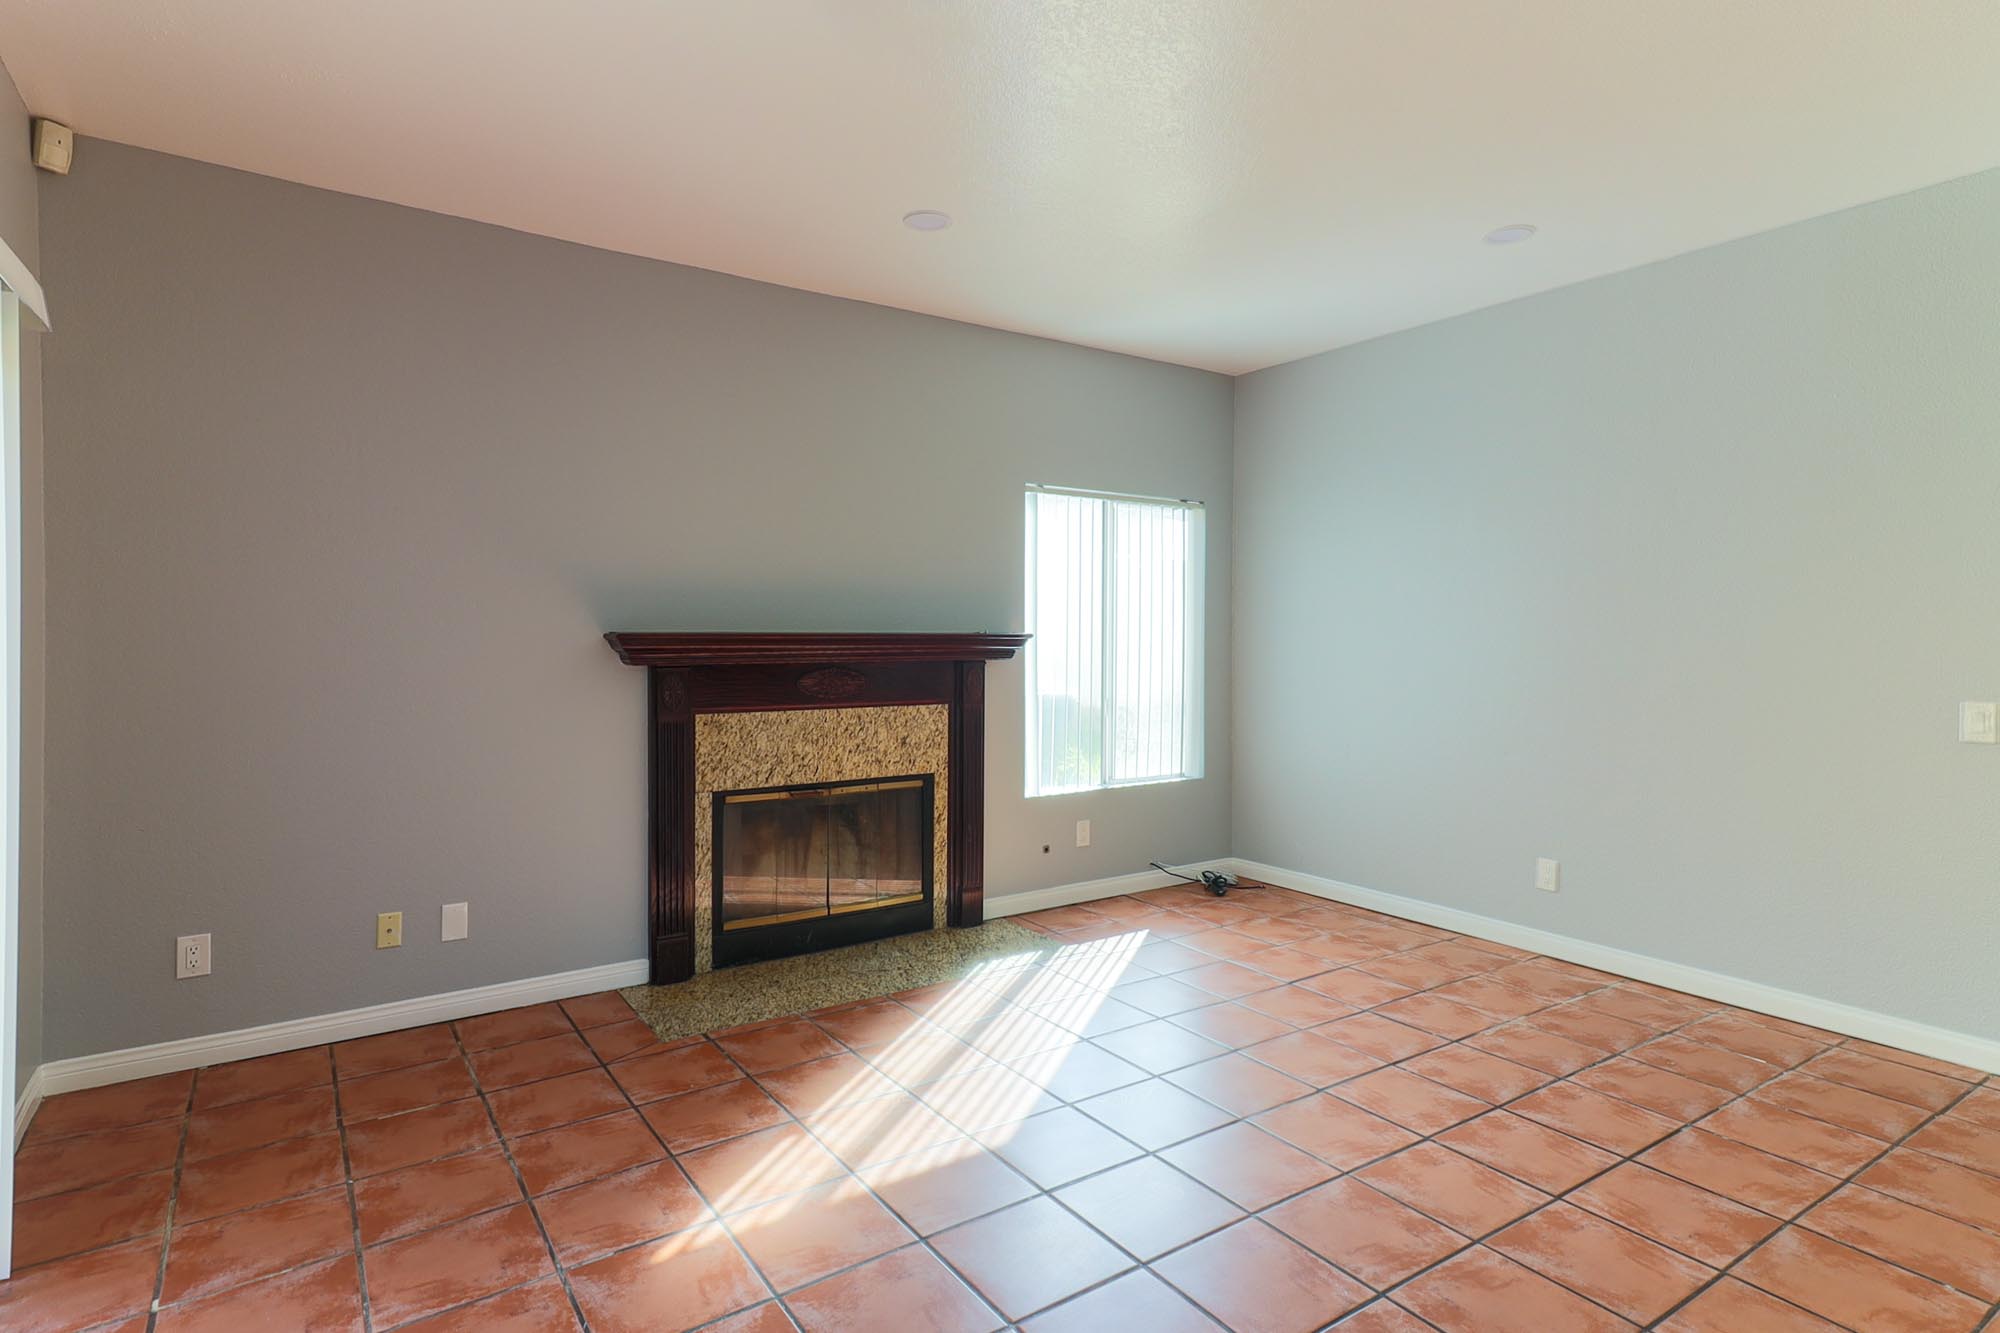 Village family room with fireplace photo